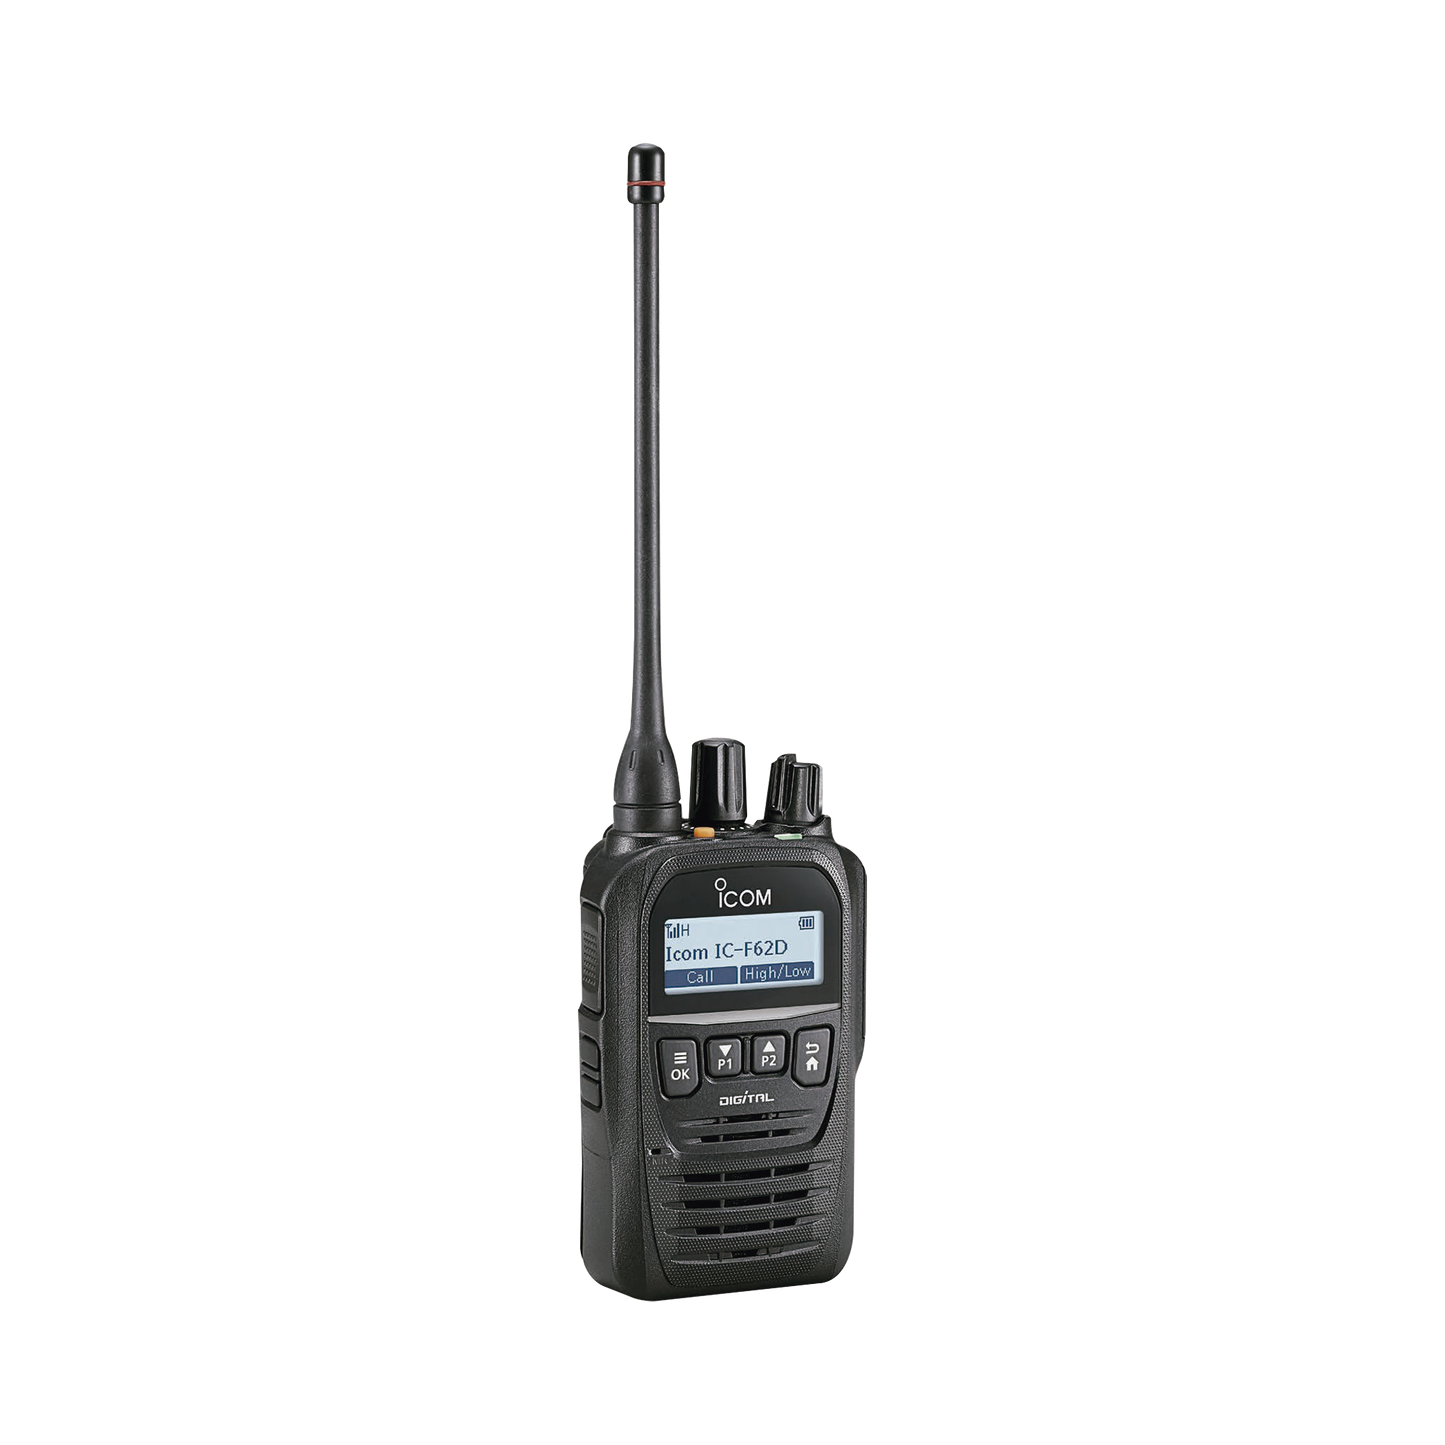 Portable digital radio with 512 channels, 400-470MHz, submersible, Bluetooth built-in. Supplied with Battery, Belt Clip, Charger, and Antenna